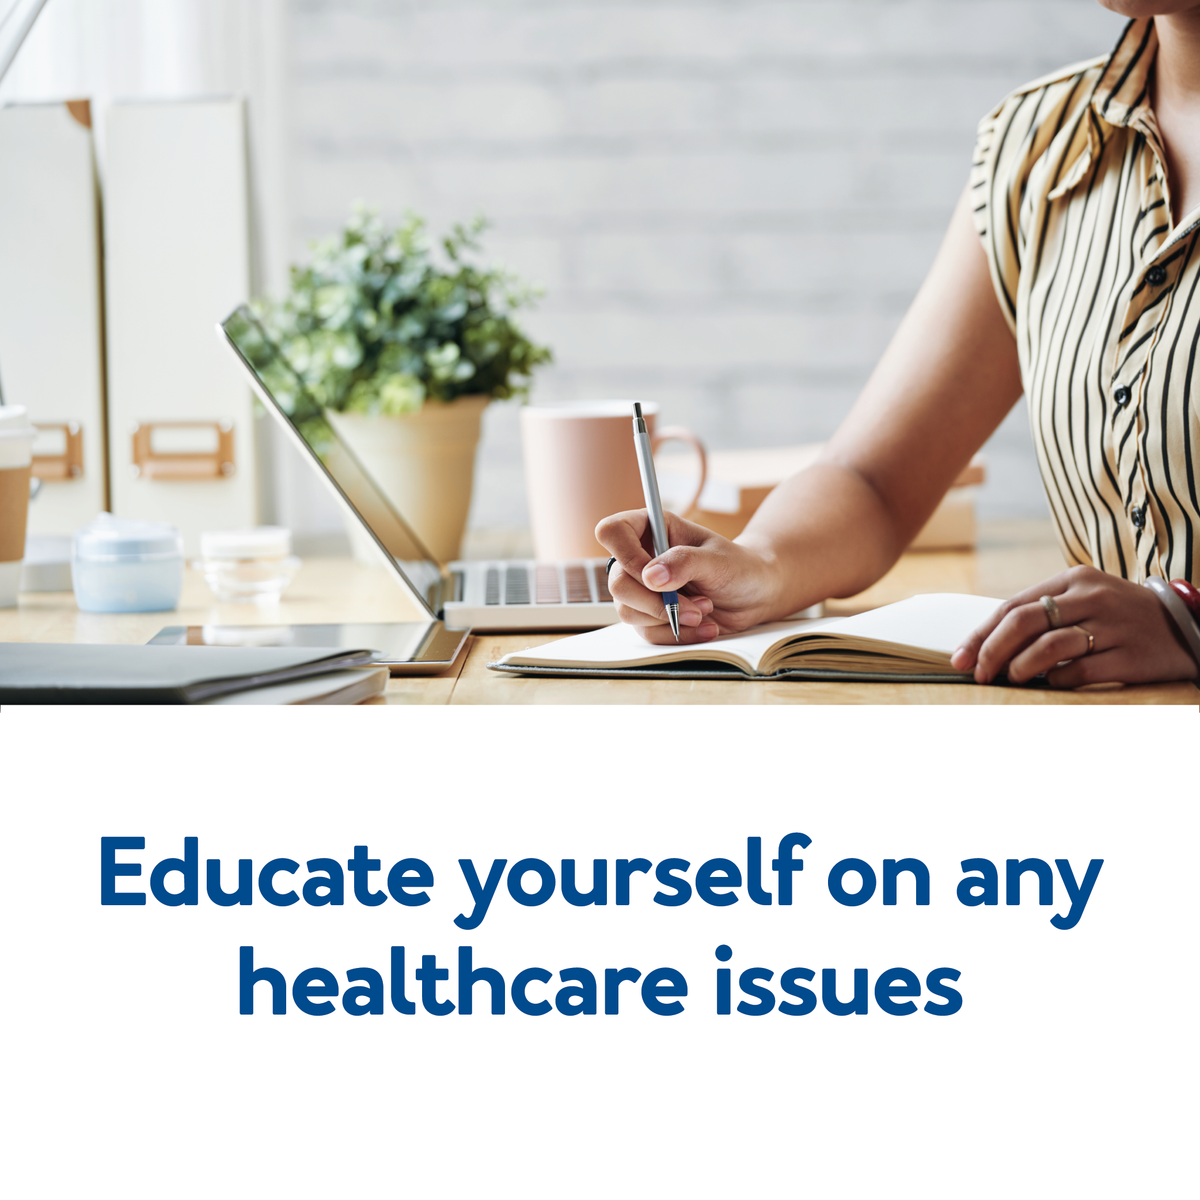 A person writing on a desk. Text, “Educate yourself on any healthcare issues